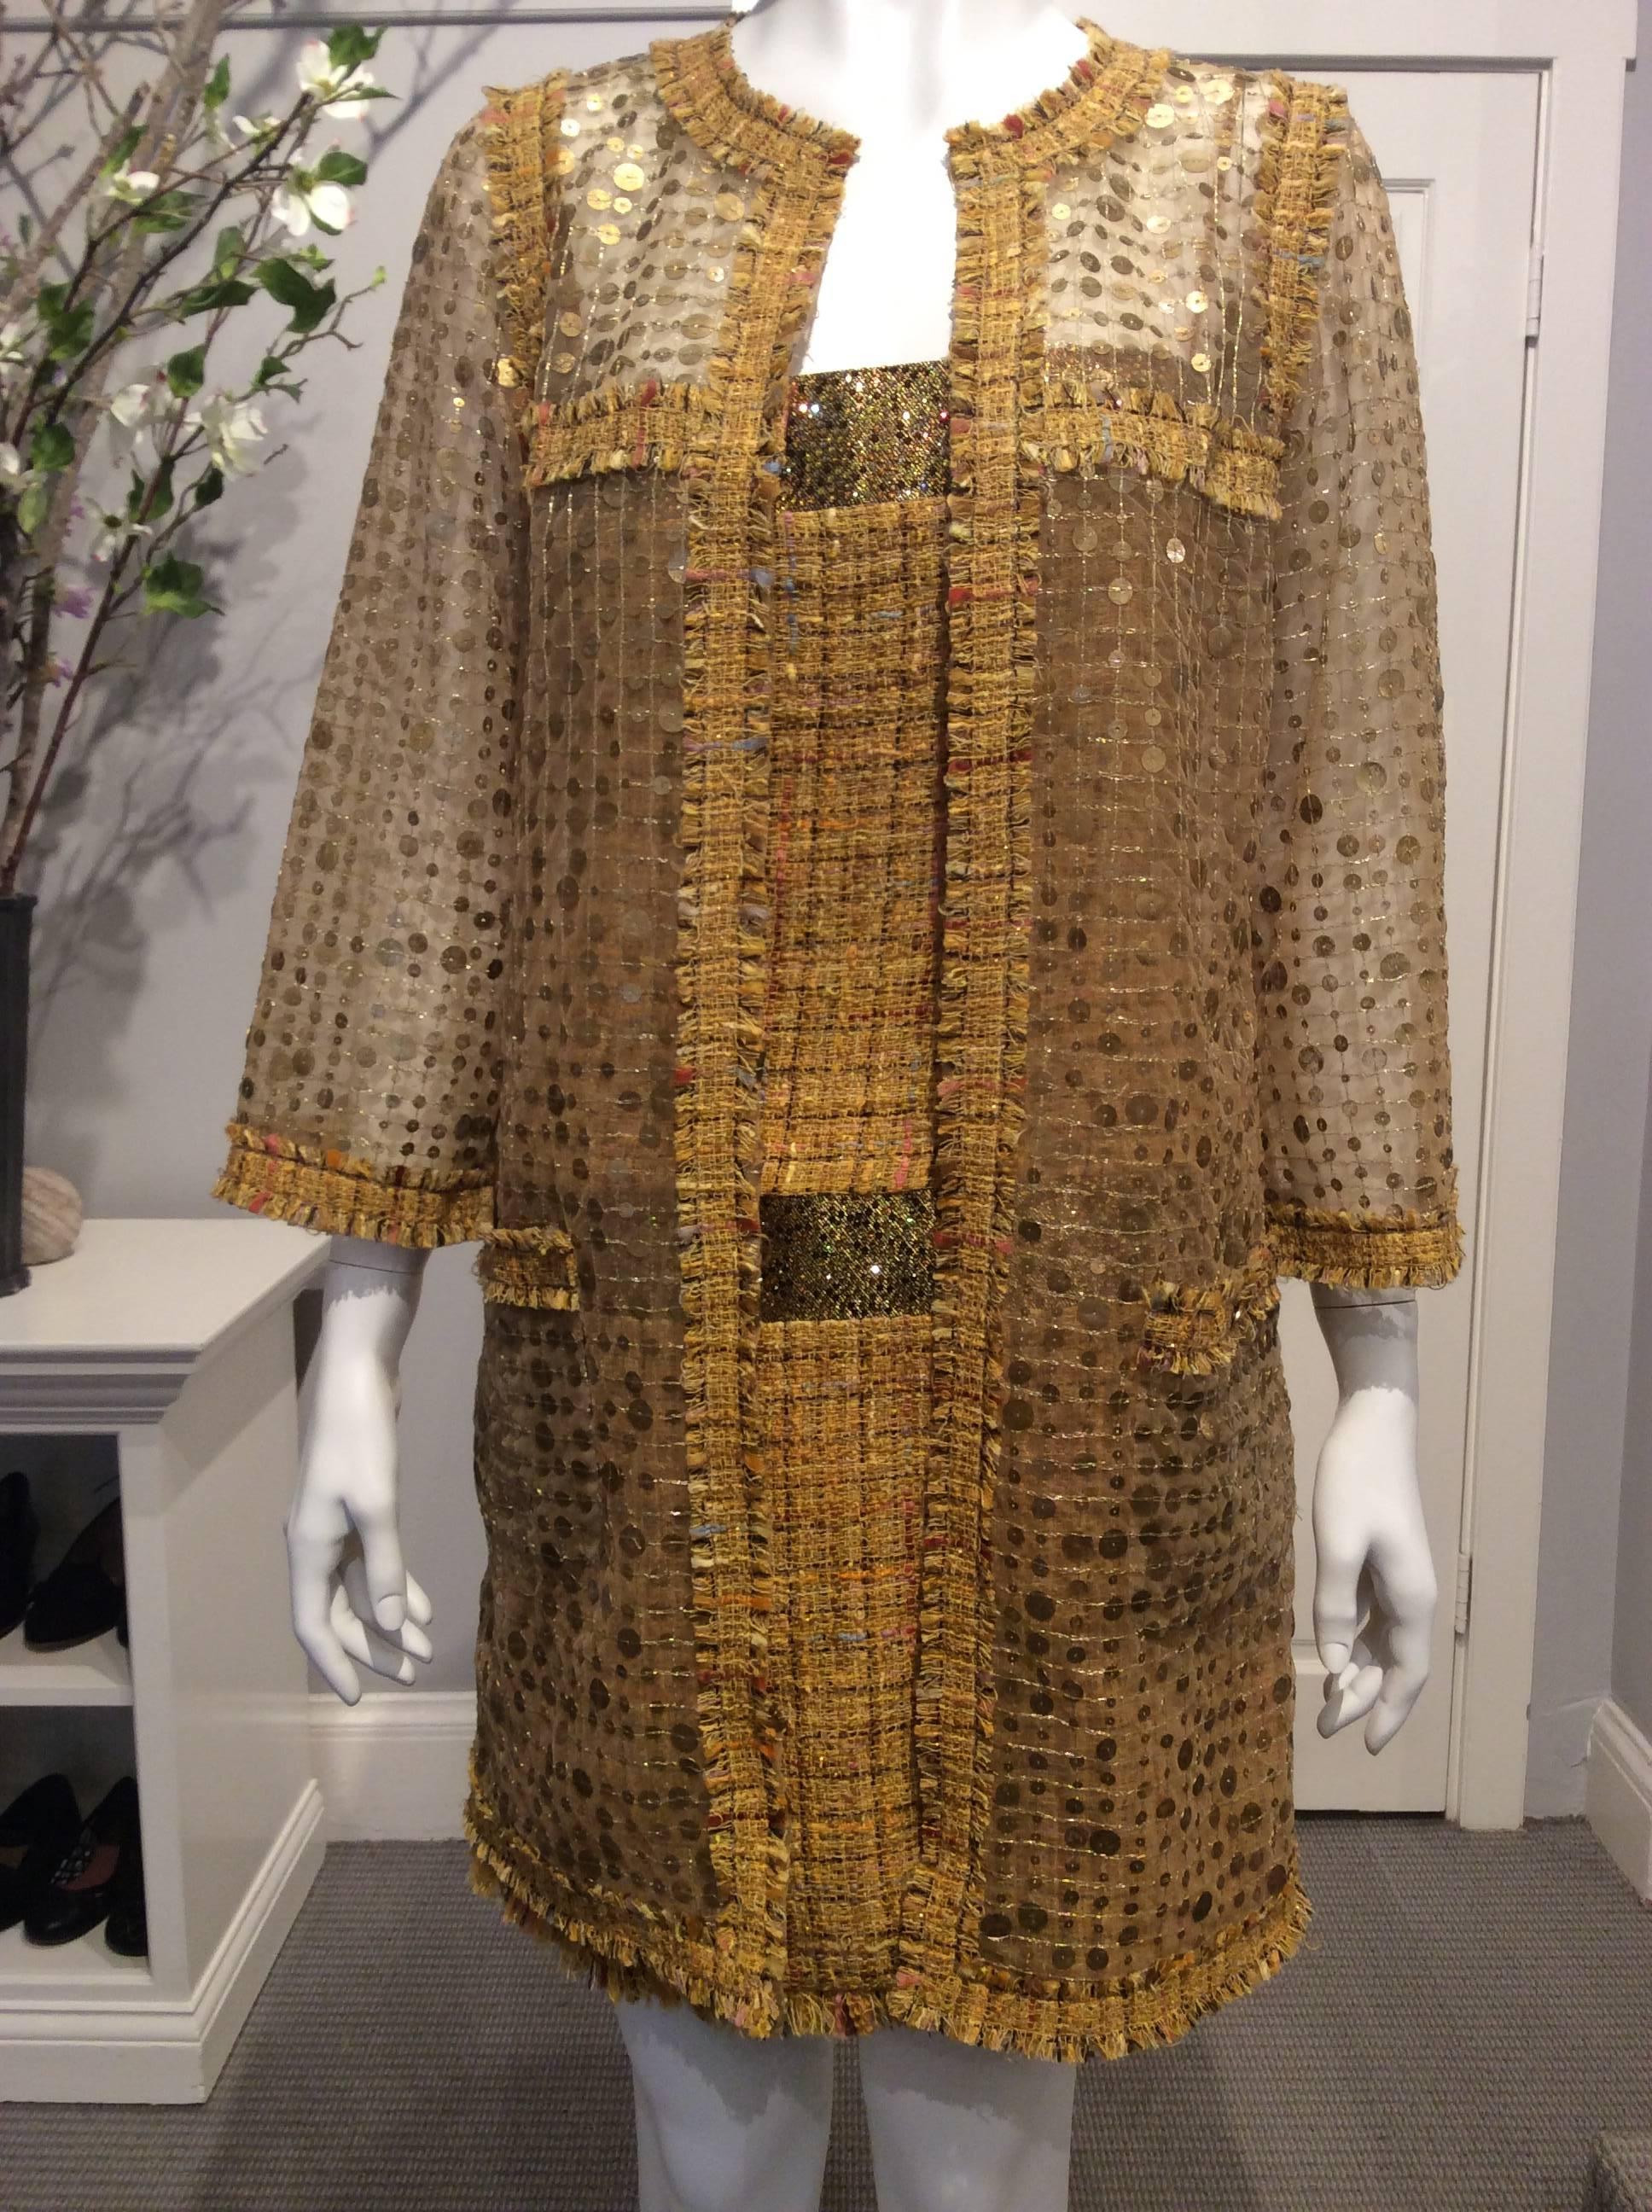 Elegant two piece Chanel outfit consisting of a dress and a semi sheer coat. The fabric of the dress is a soft looped tweed in the warmest sunflower yellow with a delicate grid in brown and random threads in different muted shades that range from